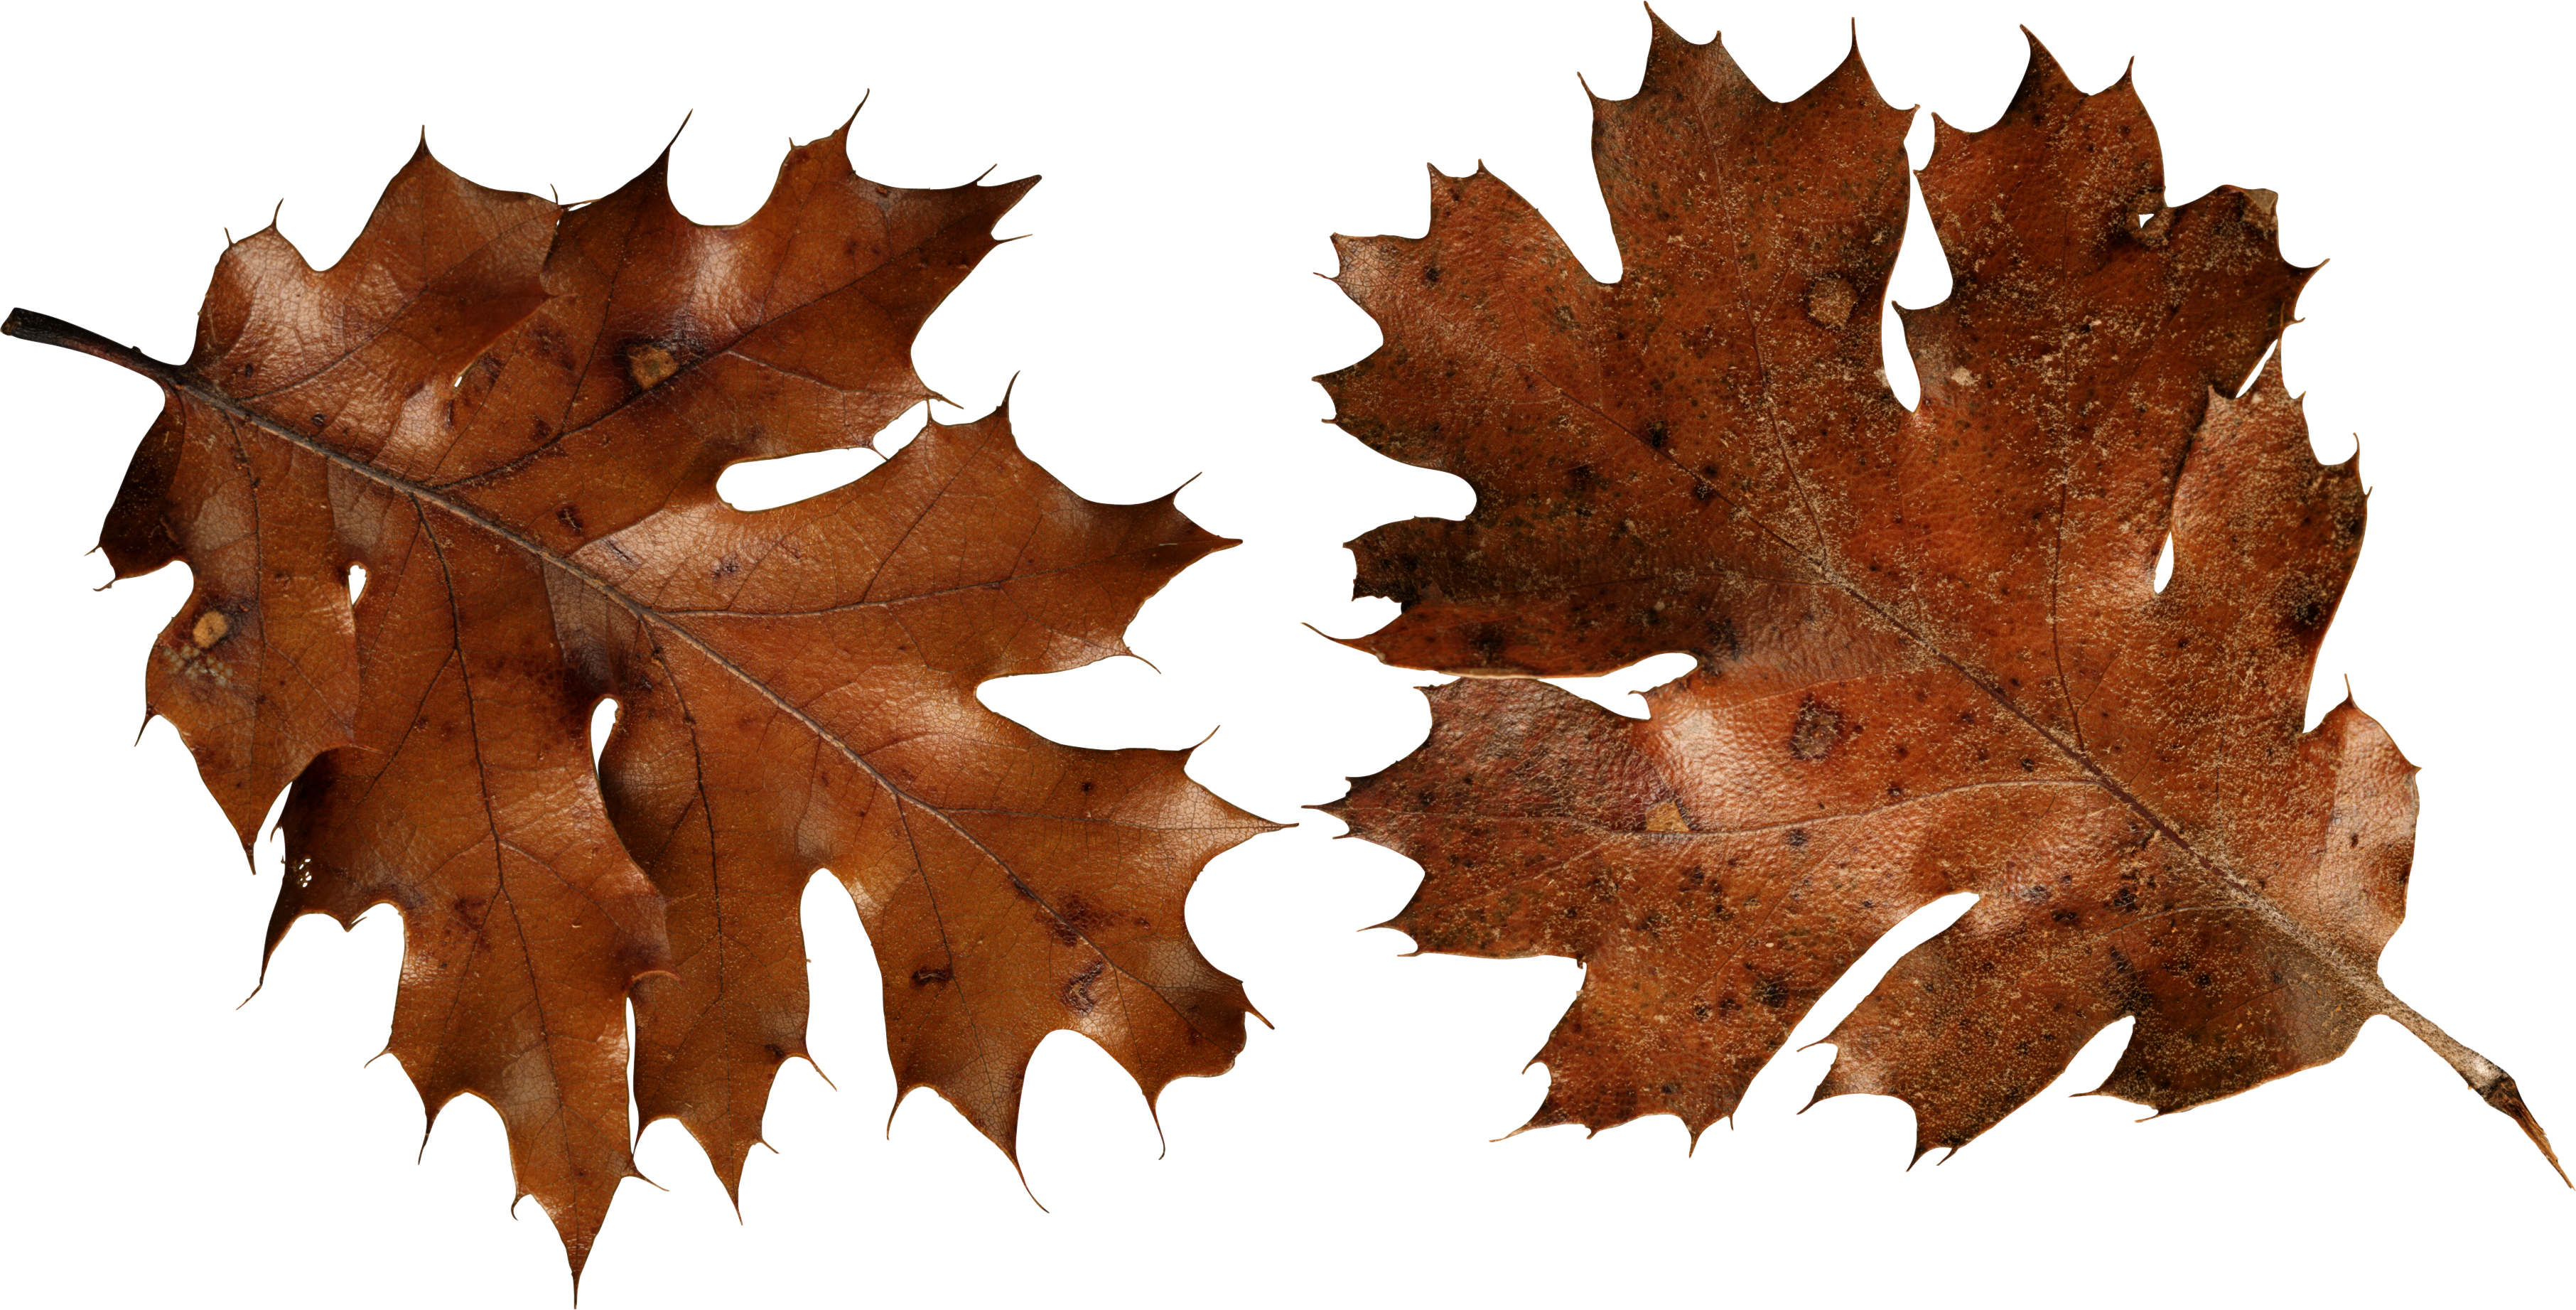 Brown Autumn Leaves PNG Image - PurePNG | Free transparent CC0 PNG ...